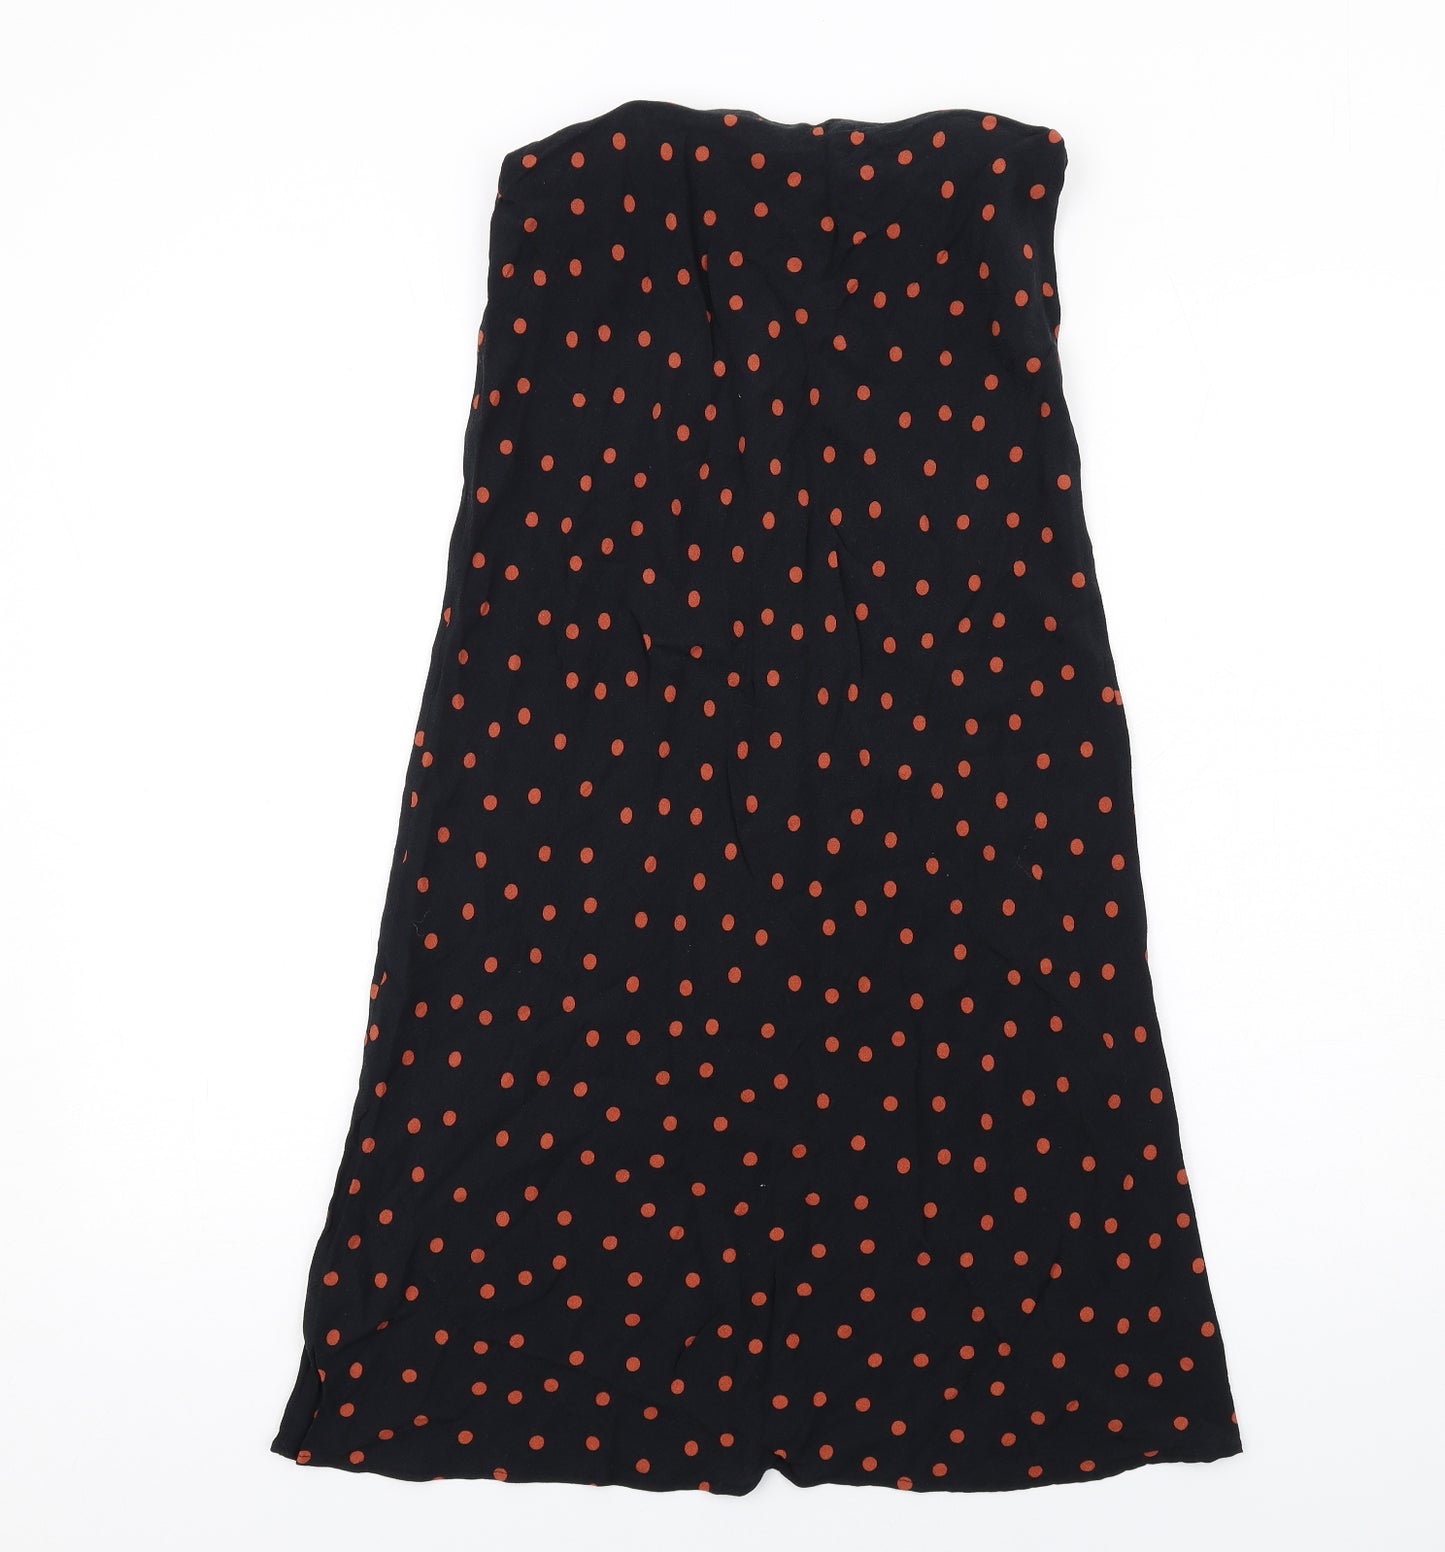 New Look Womens Black Polka Dot Polyester A-Line Skirt Size 8